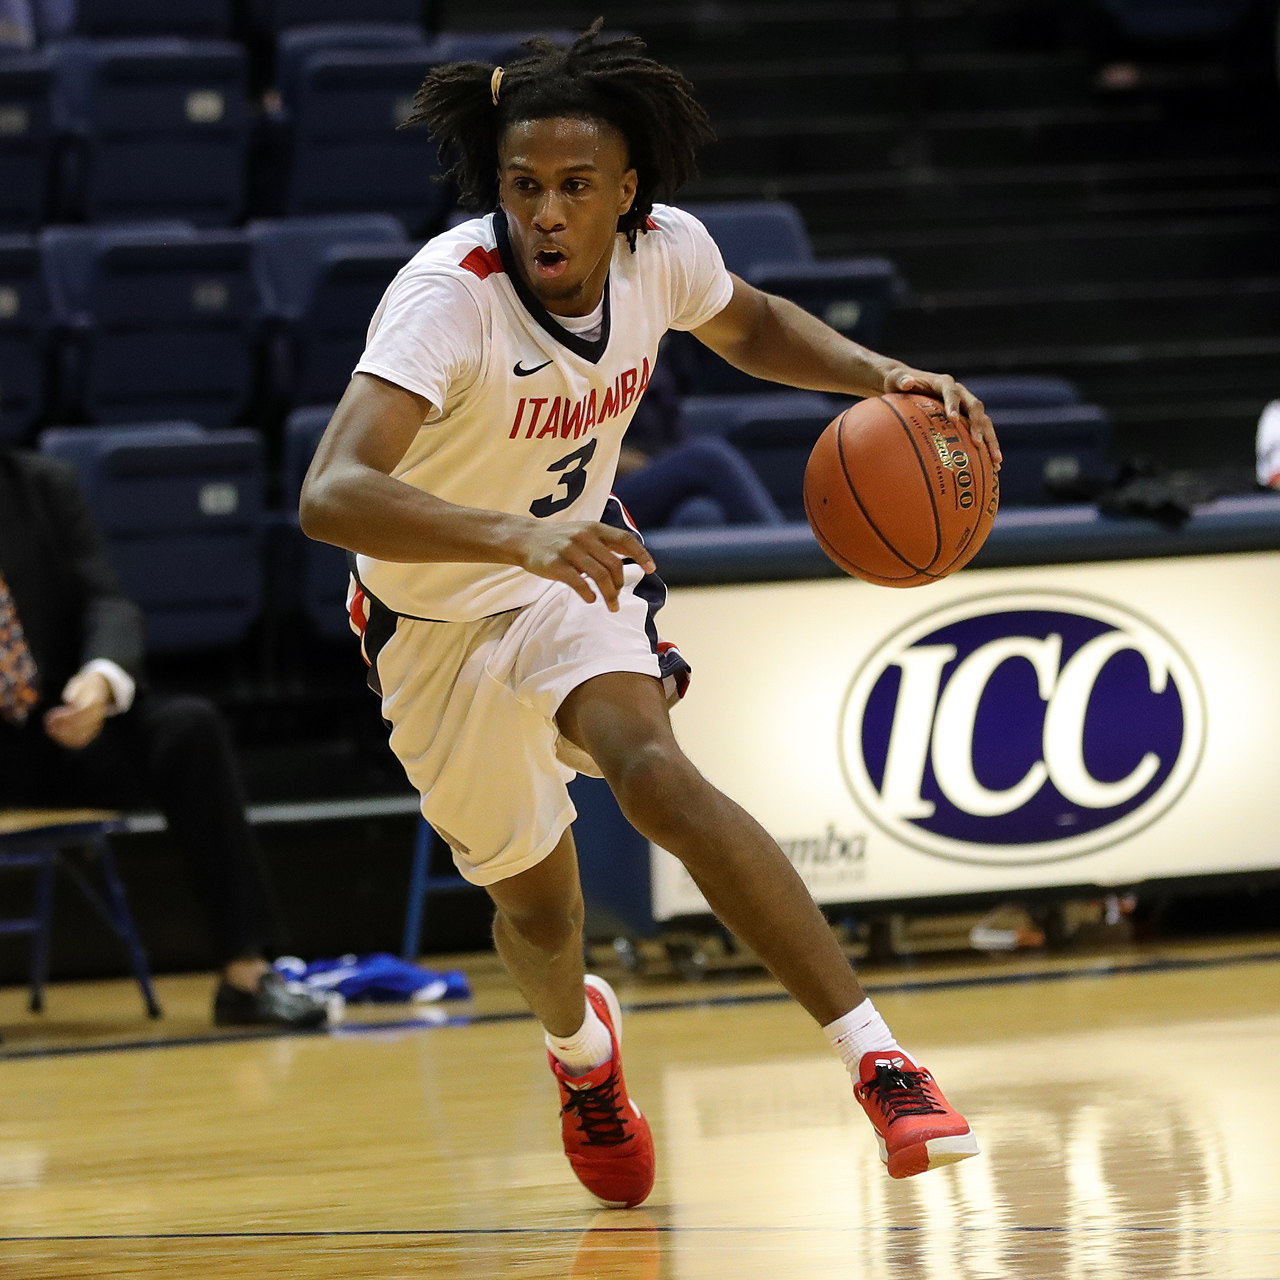 Indians fall in overtime to No. 19 Shelton State